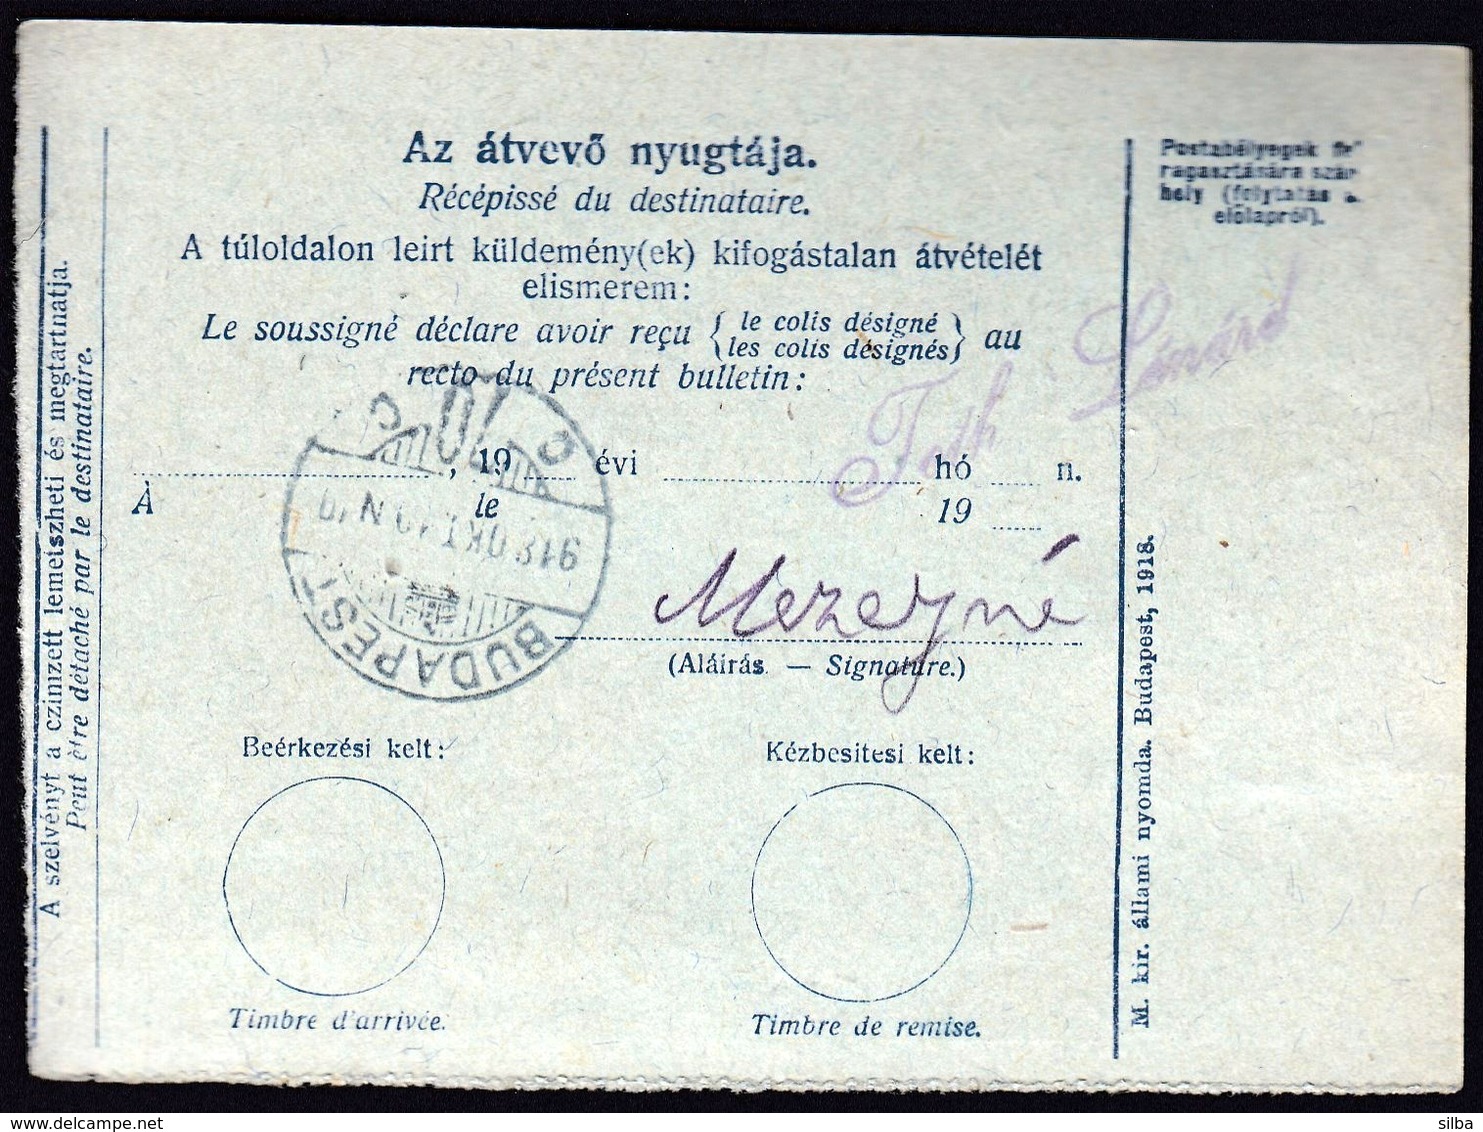 Hungary Arad 1918 / Parcel Post, Postai Szallitolevel, Bulletin D' Expedition / To Budapest - Parcel Post